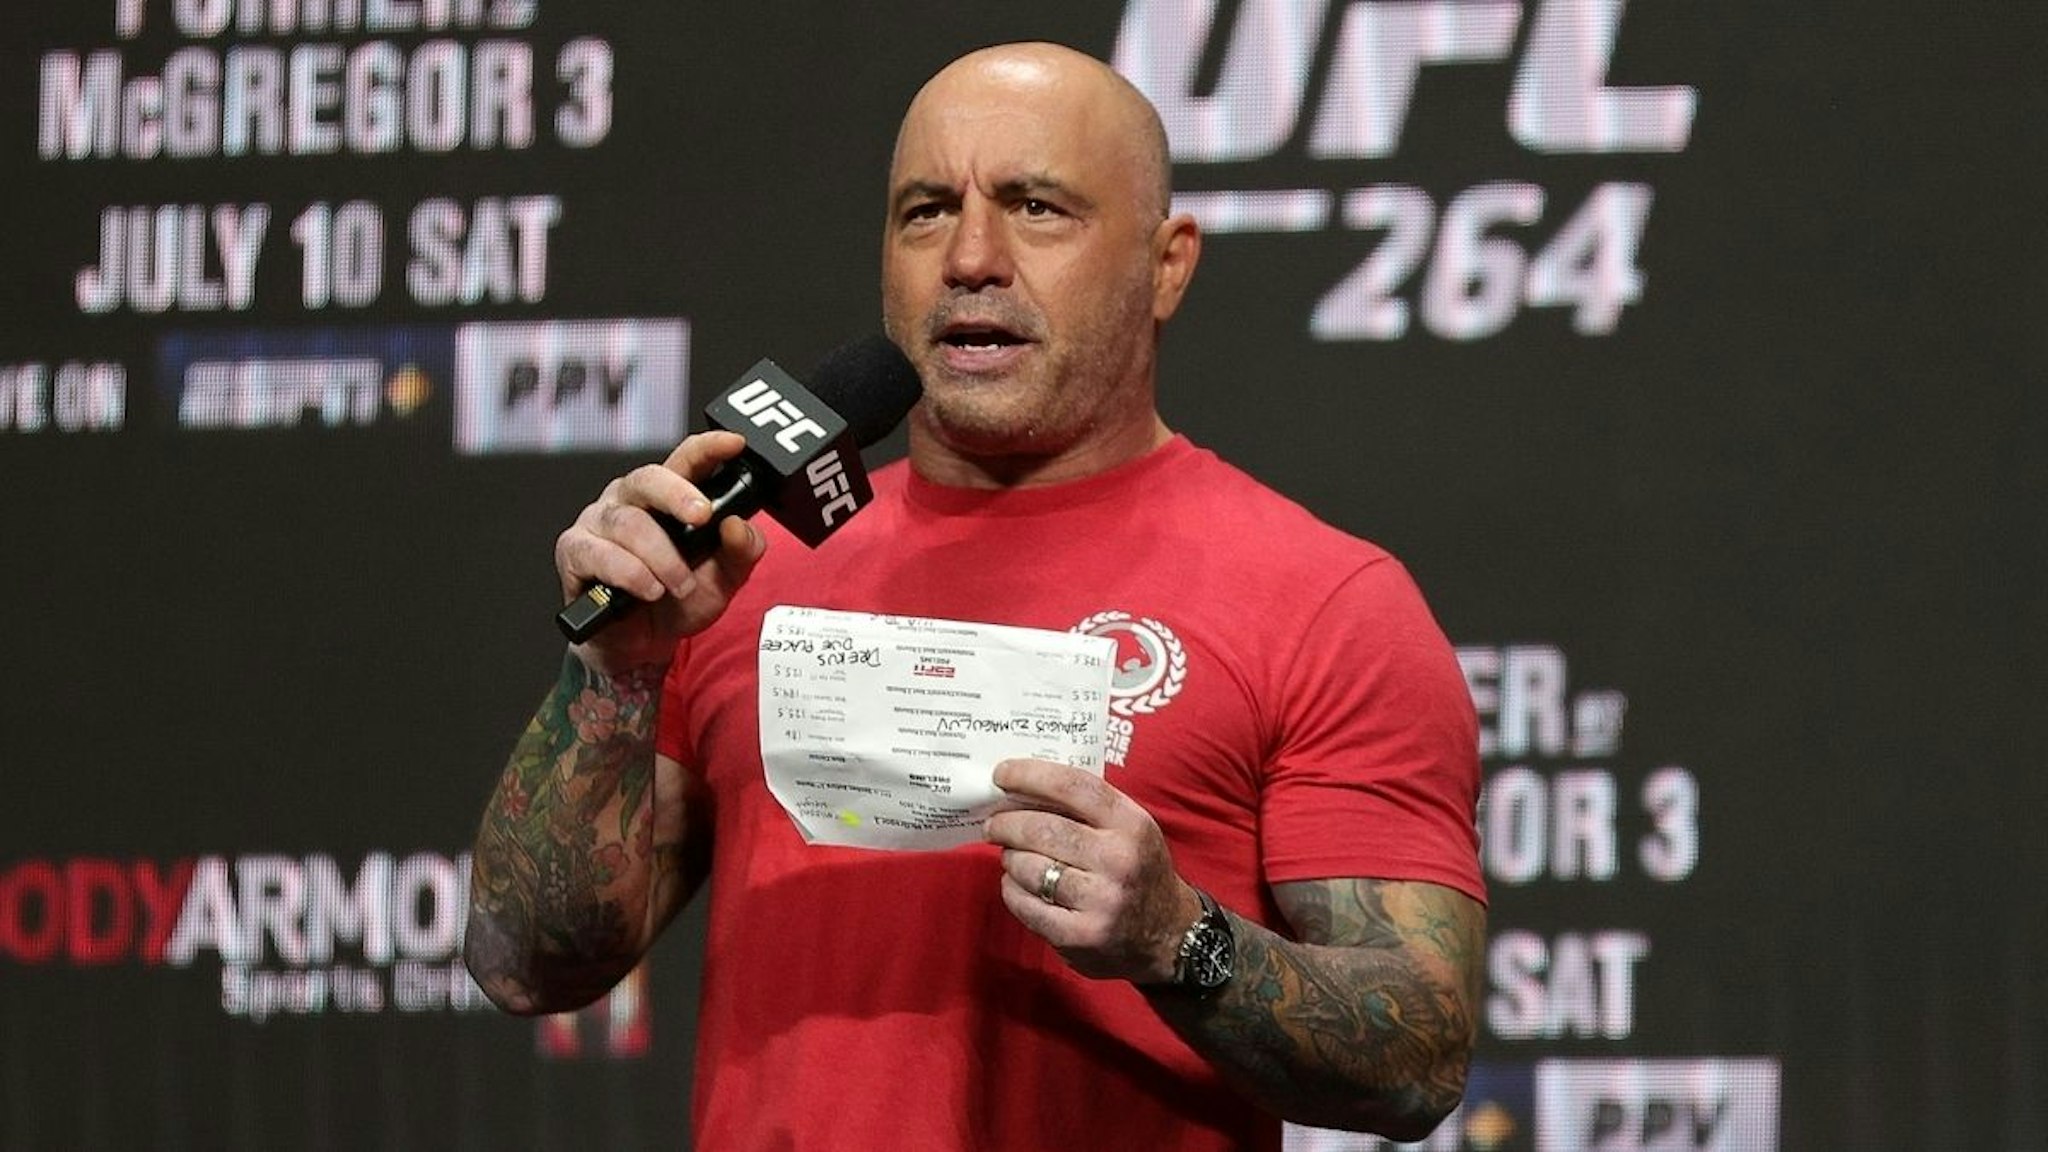 UFC commentator Joe Rogan announces the fighters during a ceremonial weigh in for UFC 264 at T-Mobile Arena on July 09, 2021 in Las Vegas, Nevada.